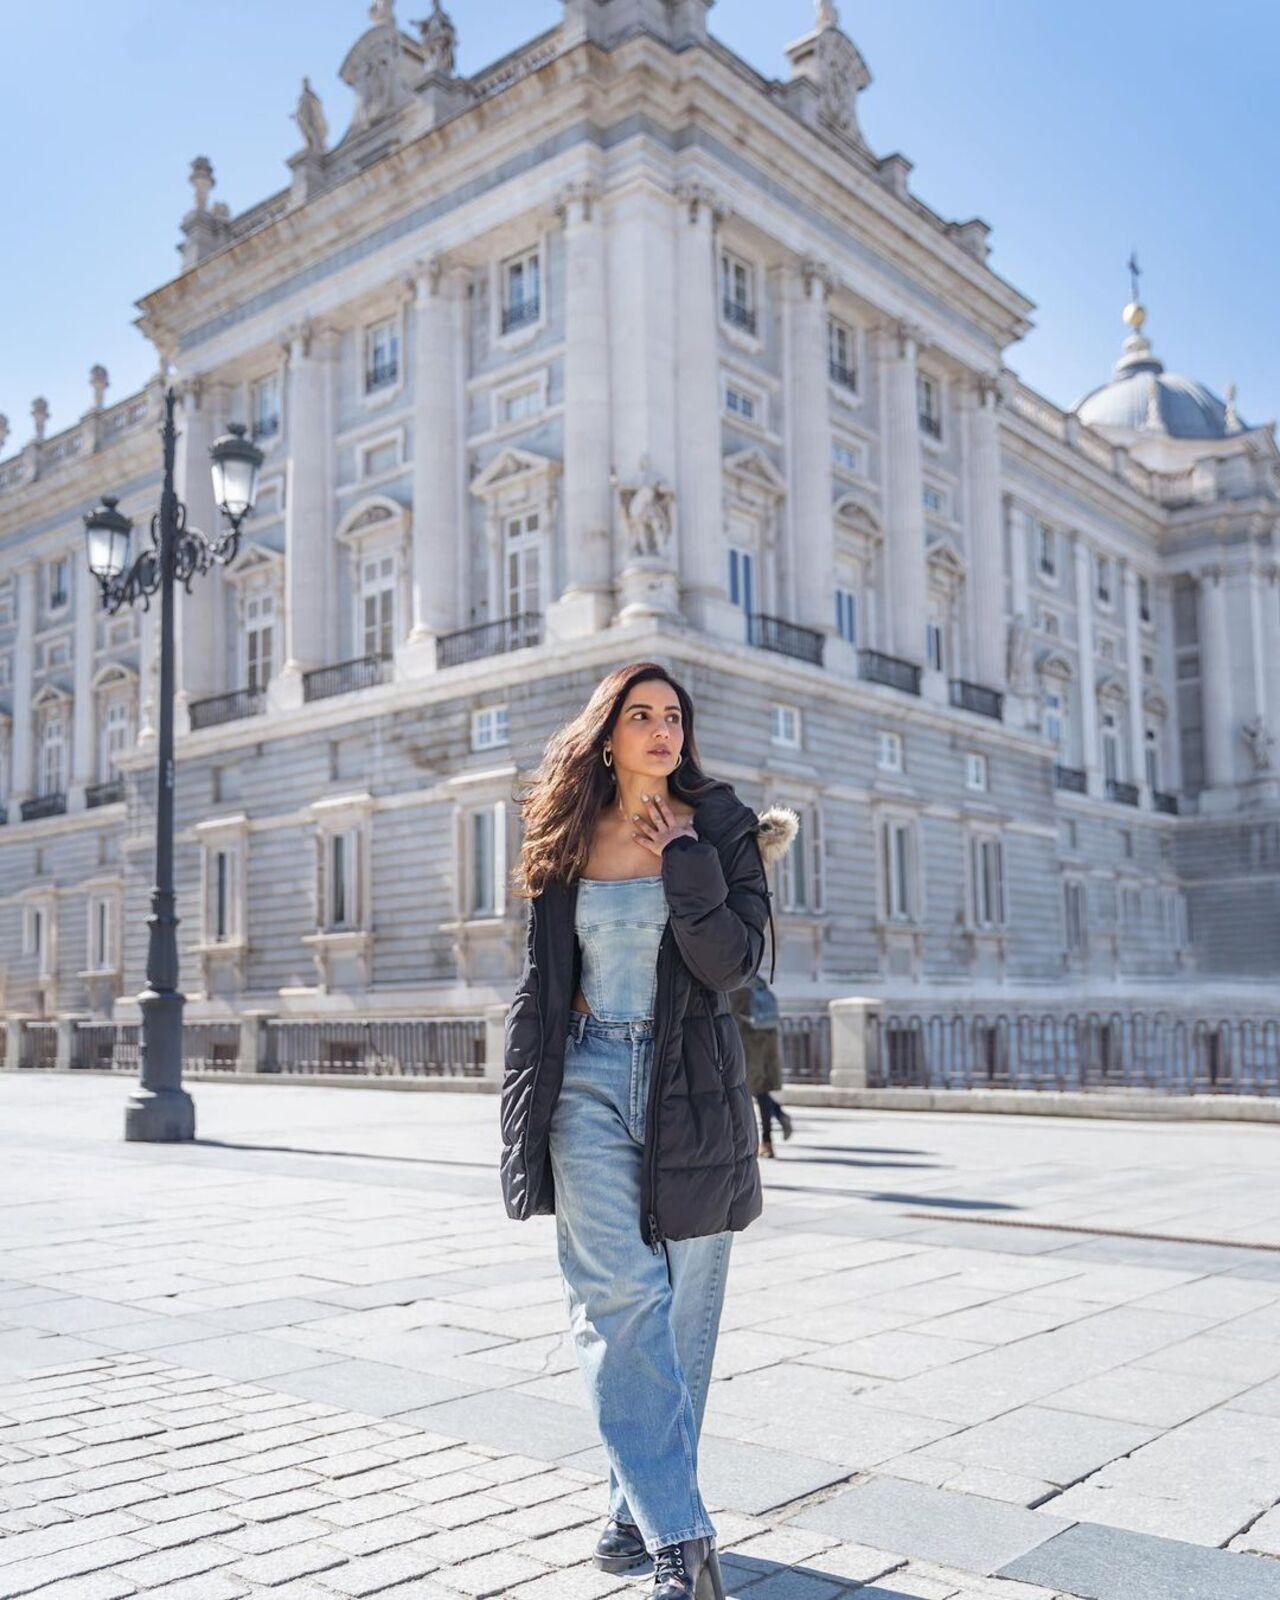 Jasmine posted this stunning picture from her vacation to Madrid